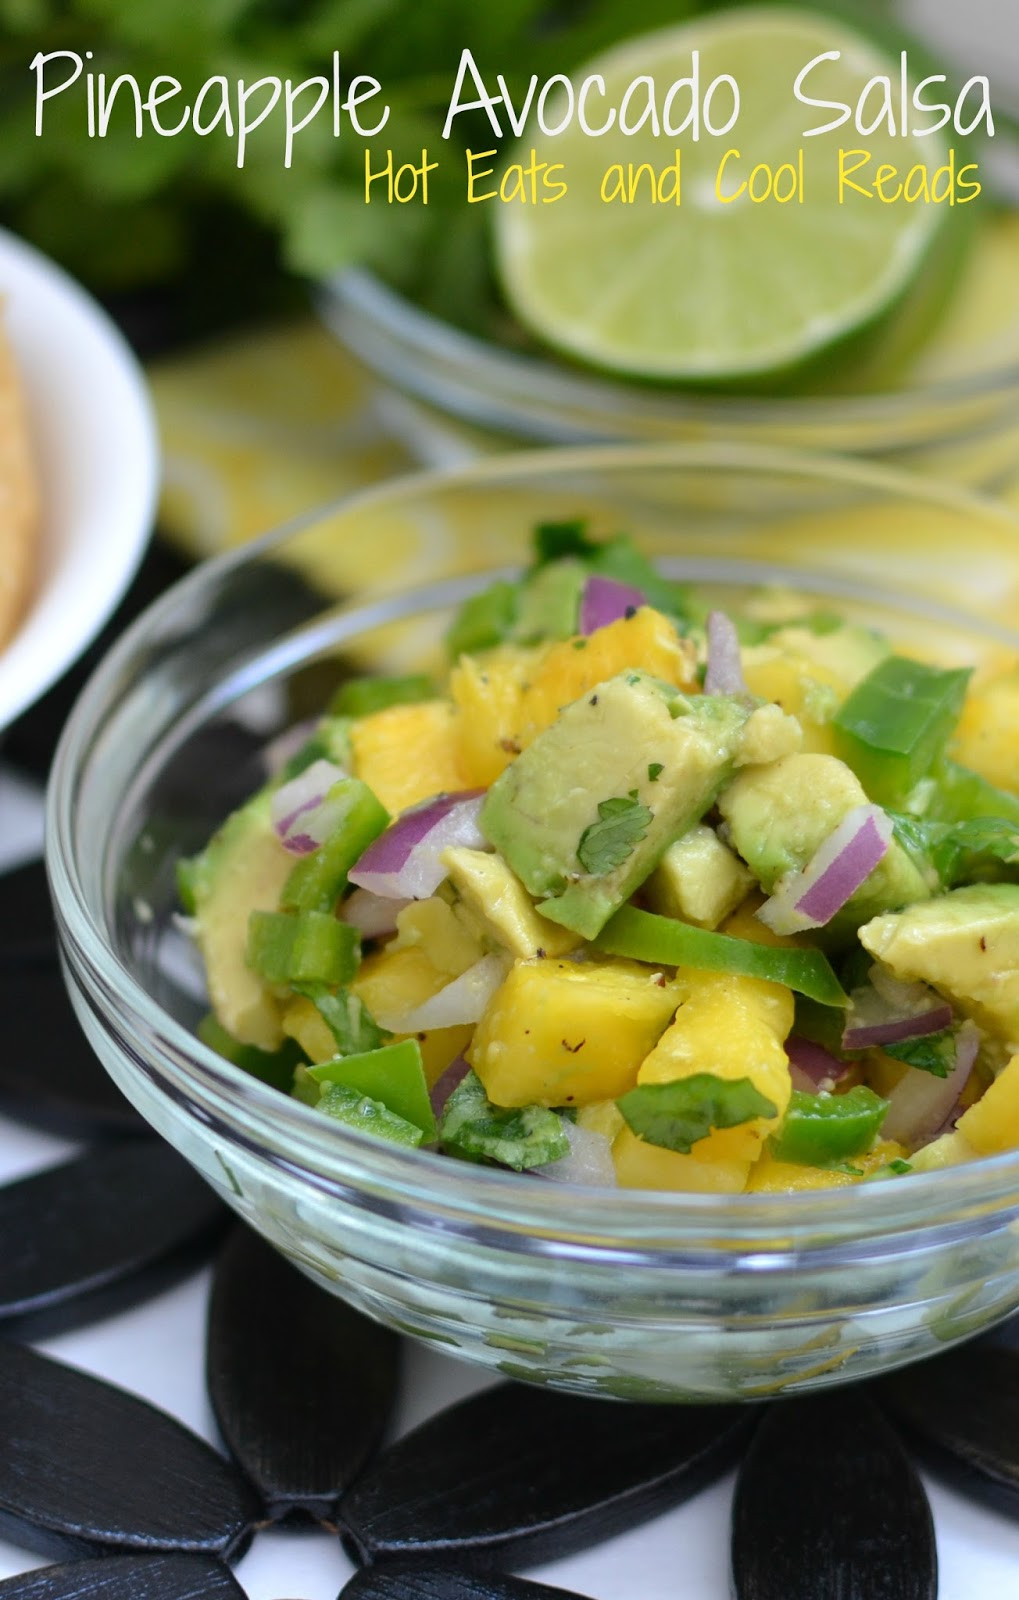 Hot Eats and Cool Reads: Pineapple Avocado Salsa Recipe